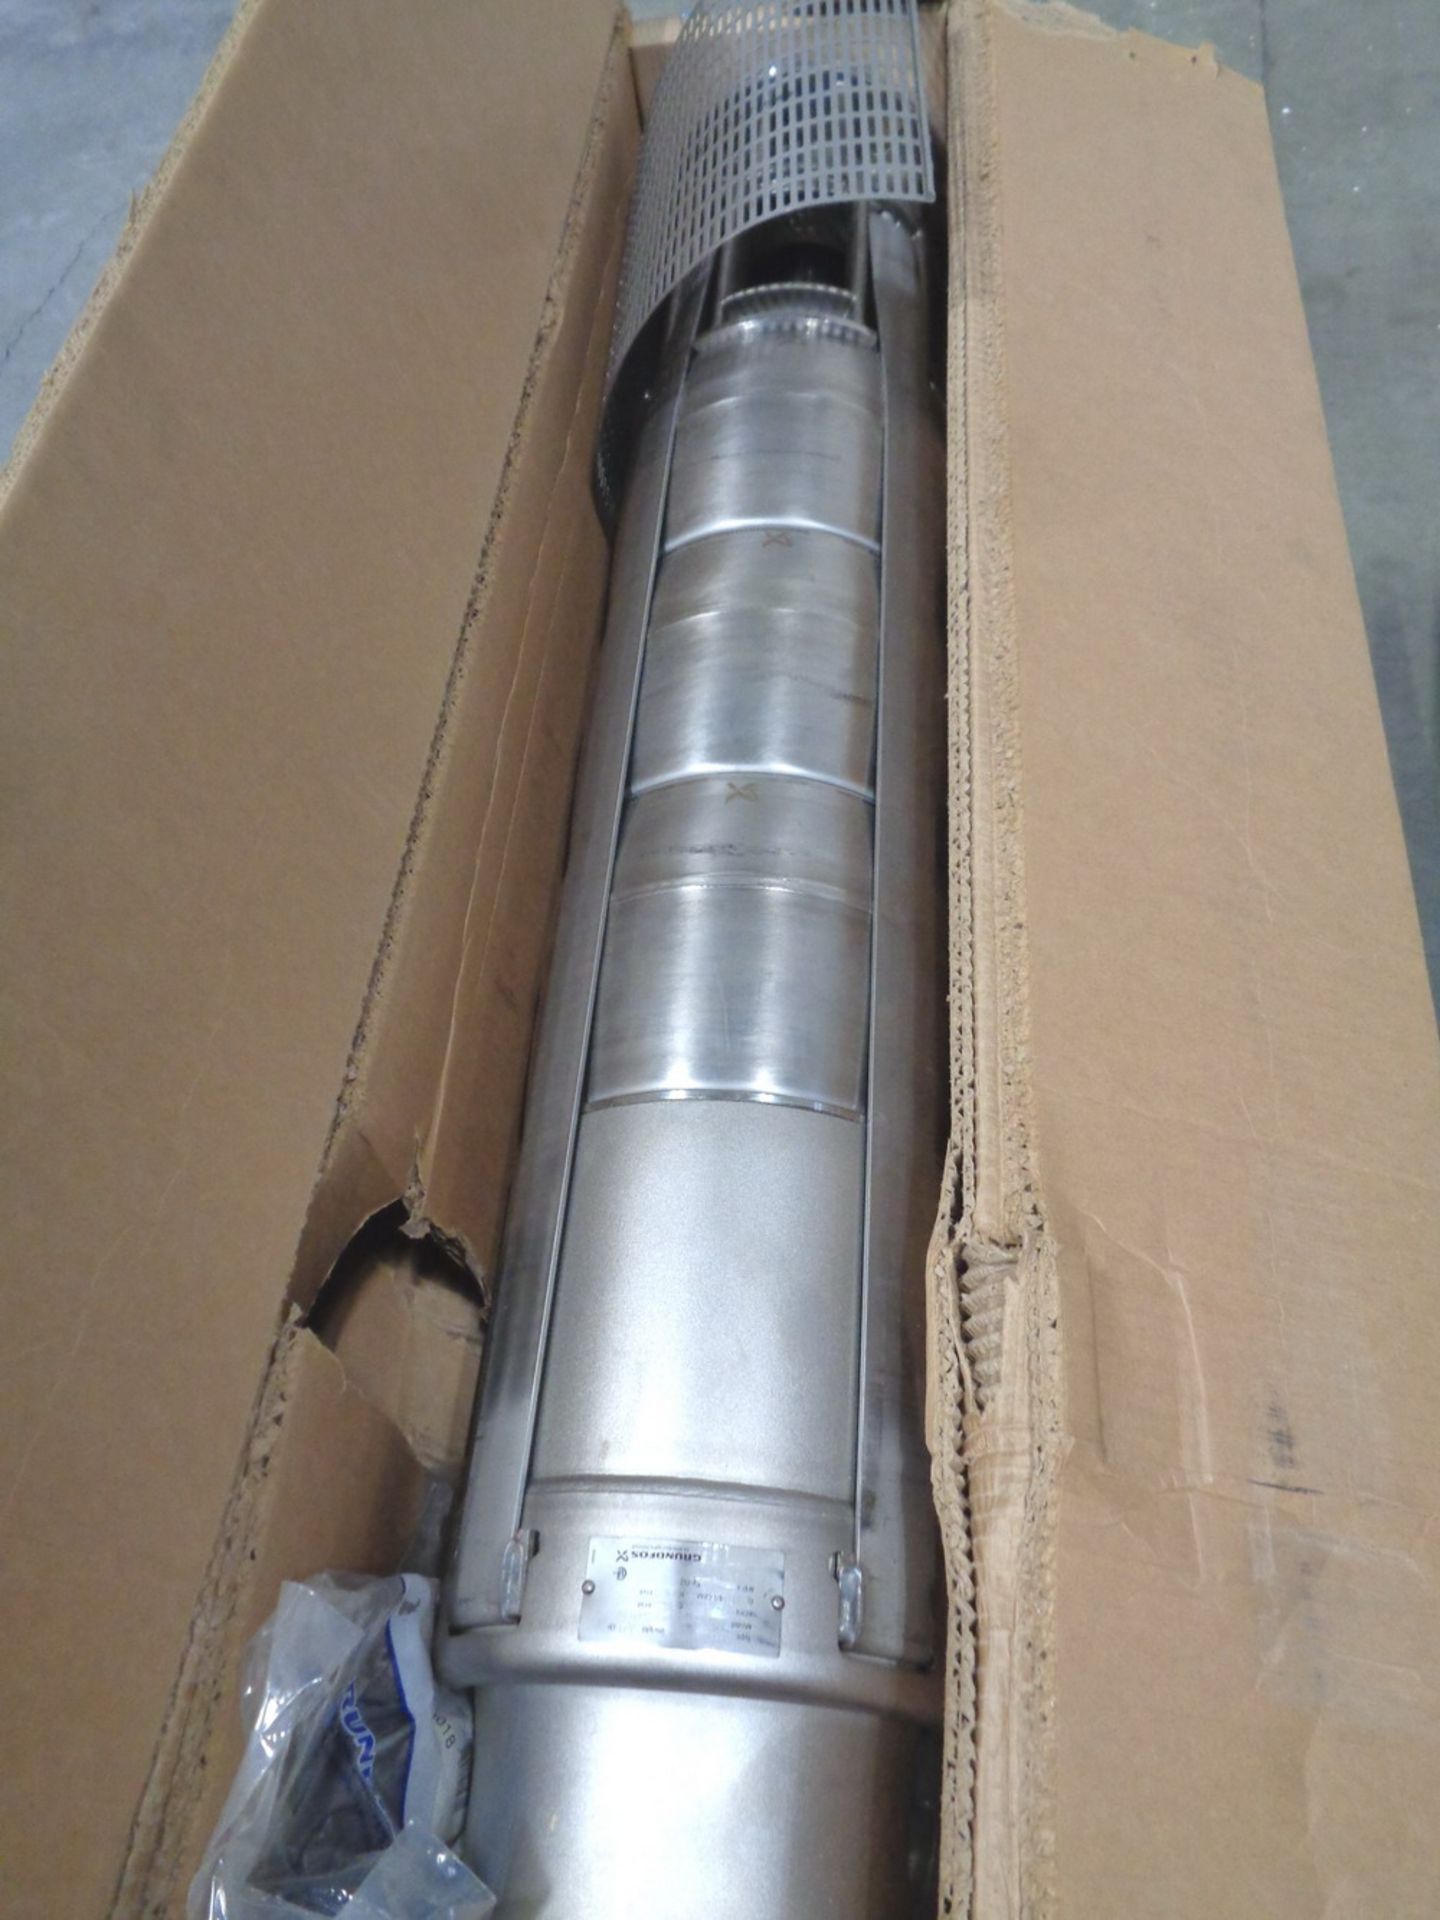 UNUSED Grundfos Stainless Steel Submersible 1100 GPM Pump w/ SS Submersible 100 HP Motor - Image 5 of 6